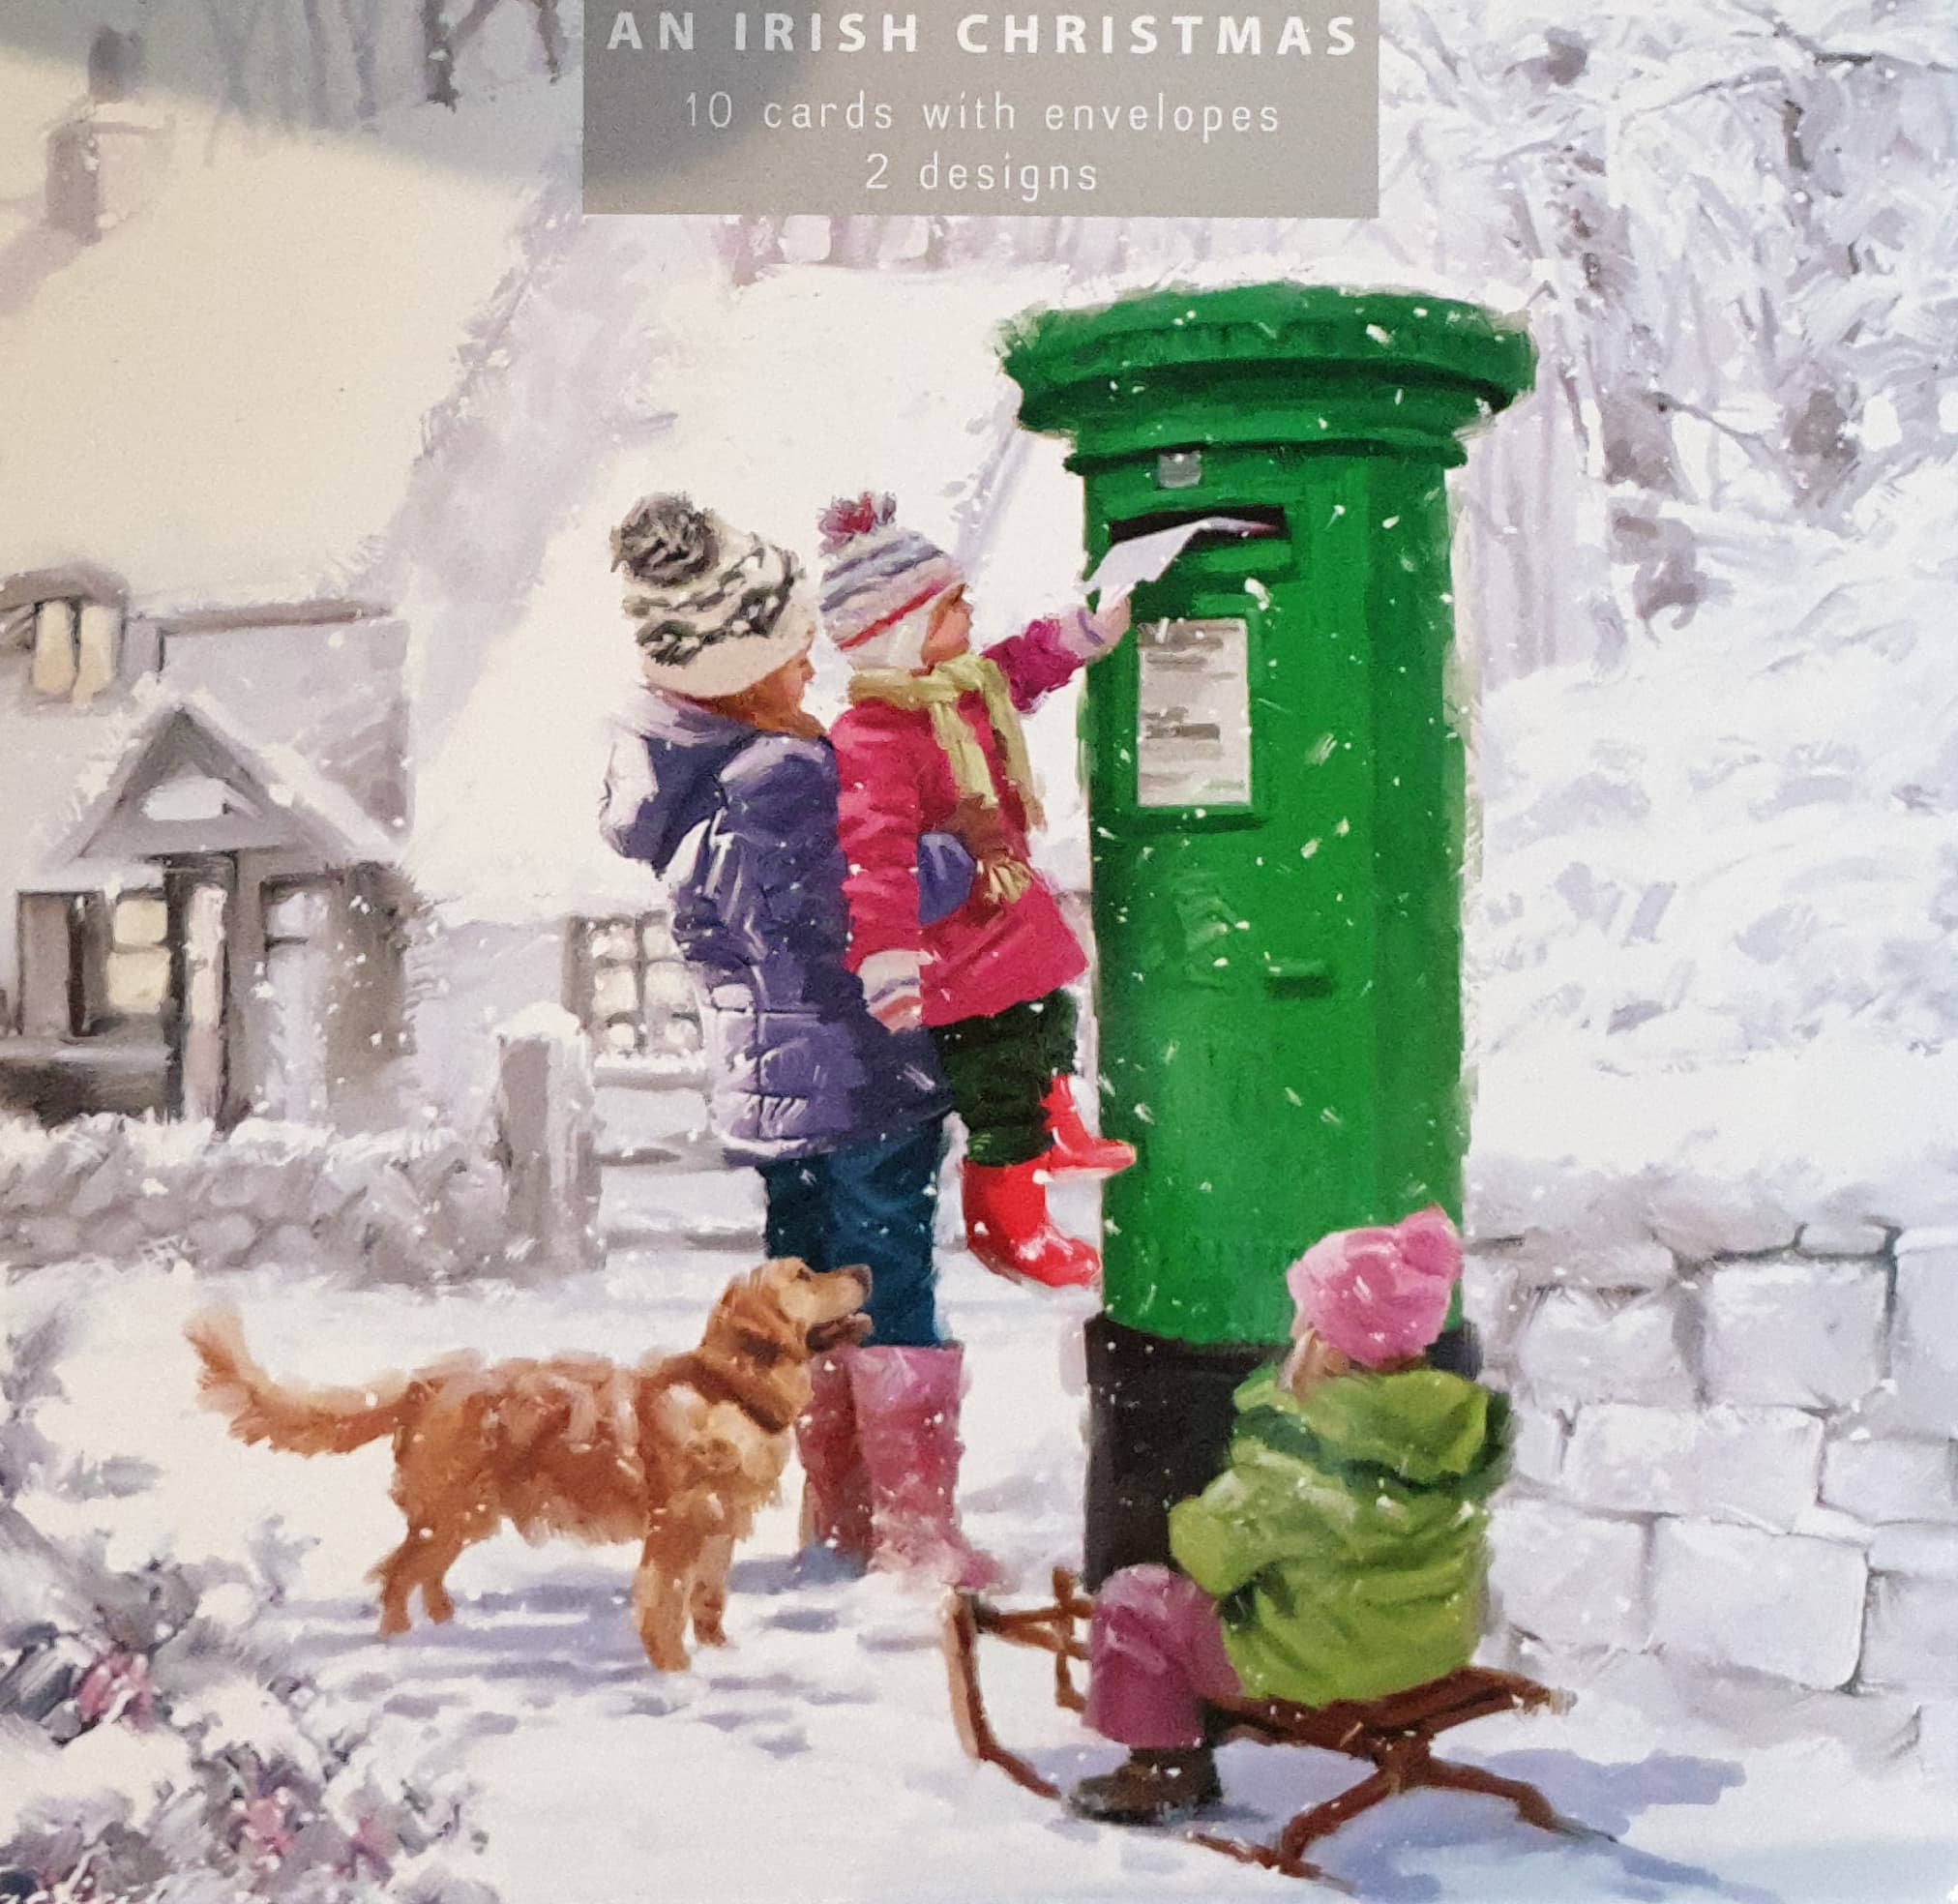 Charity Christmas Cards - 10 Cards with Envelopes / 2 Designs - An Irish Christmas